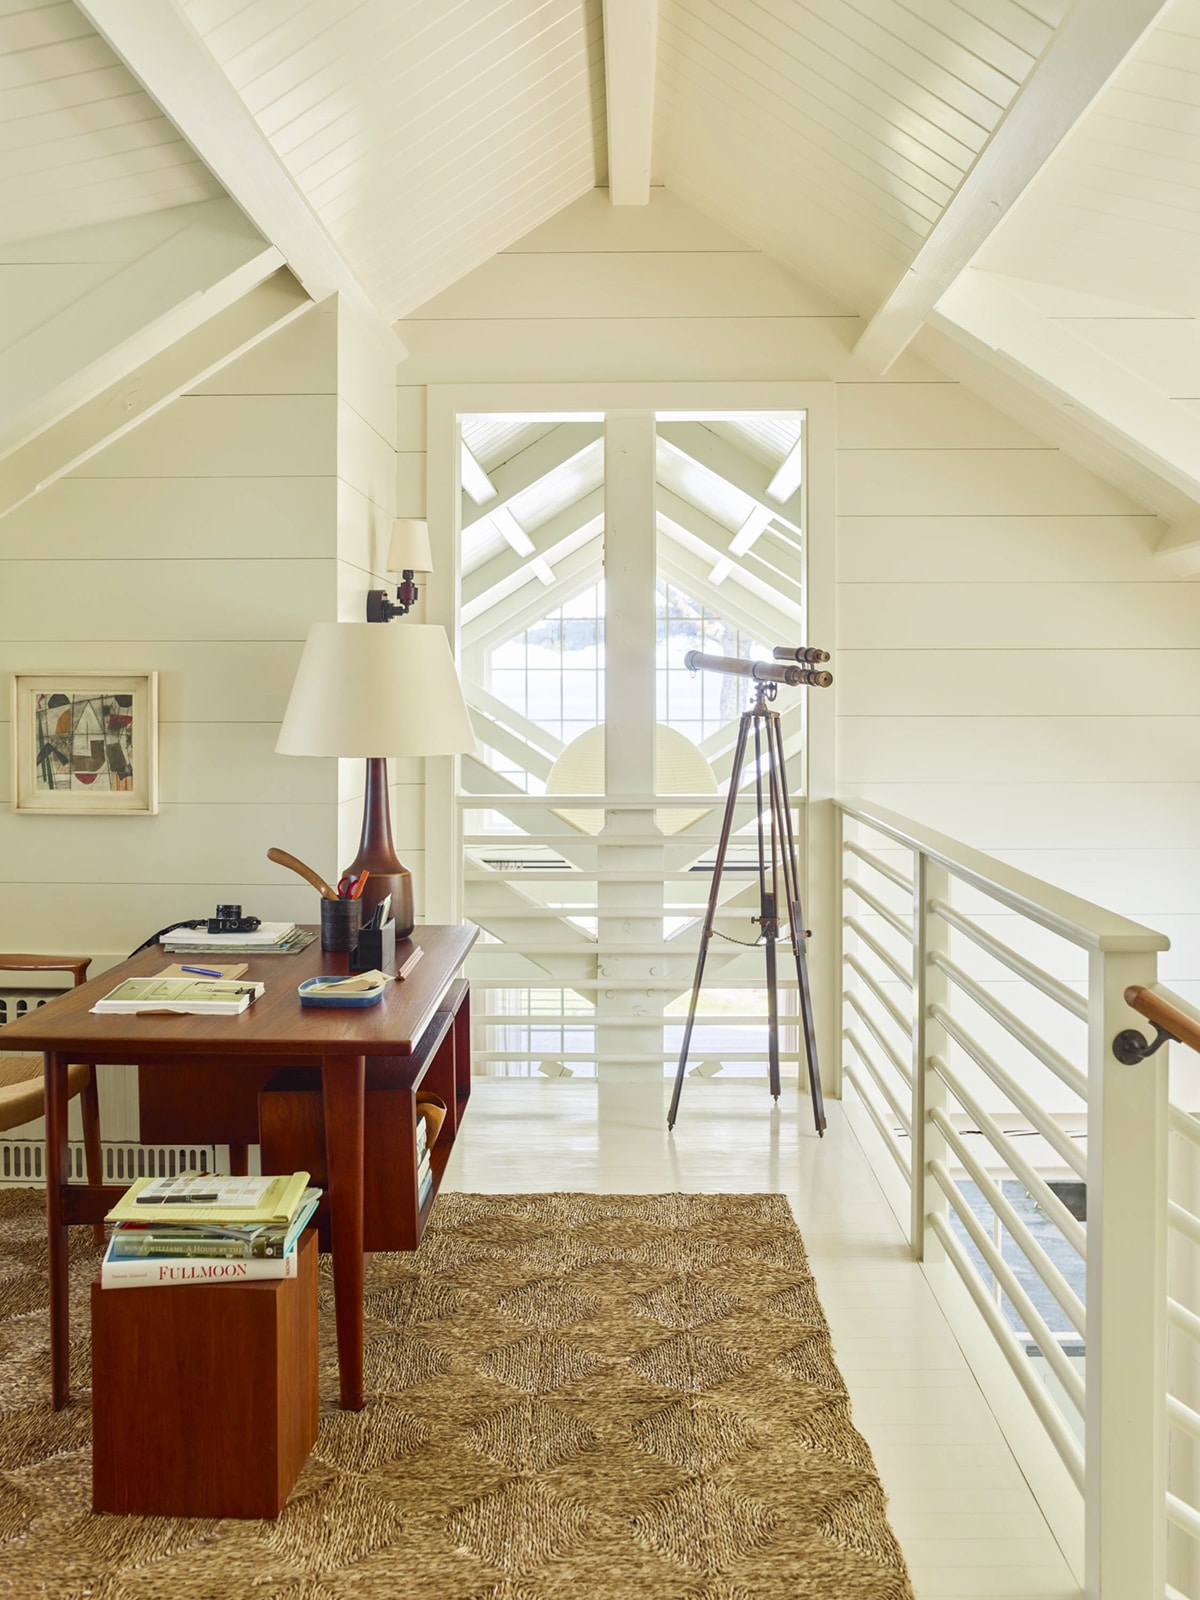 an open lofted office space in a cottage style home by the sea | design by gil schafer on coco kelley